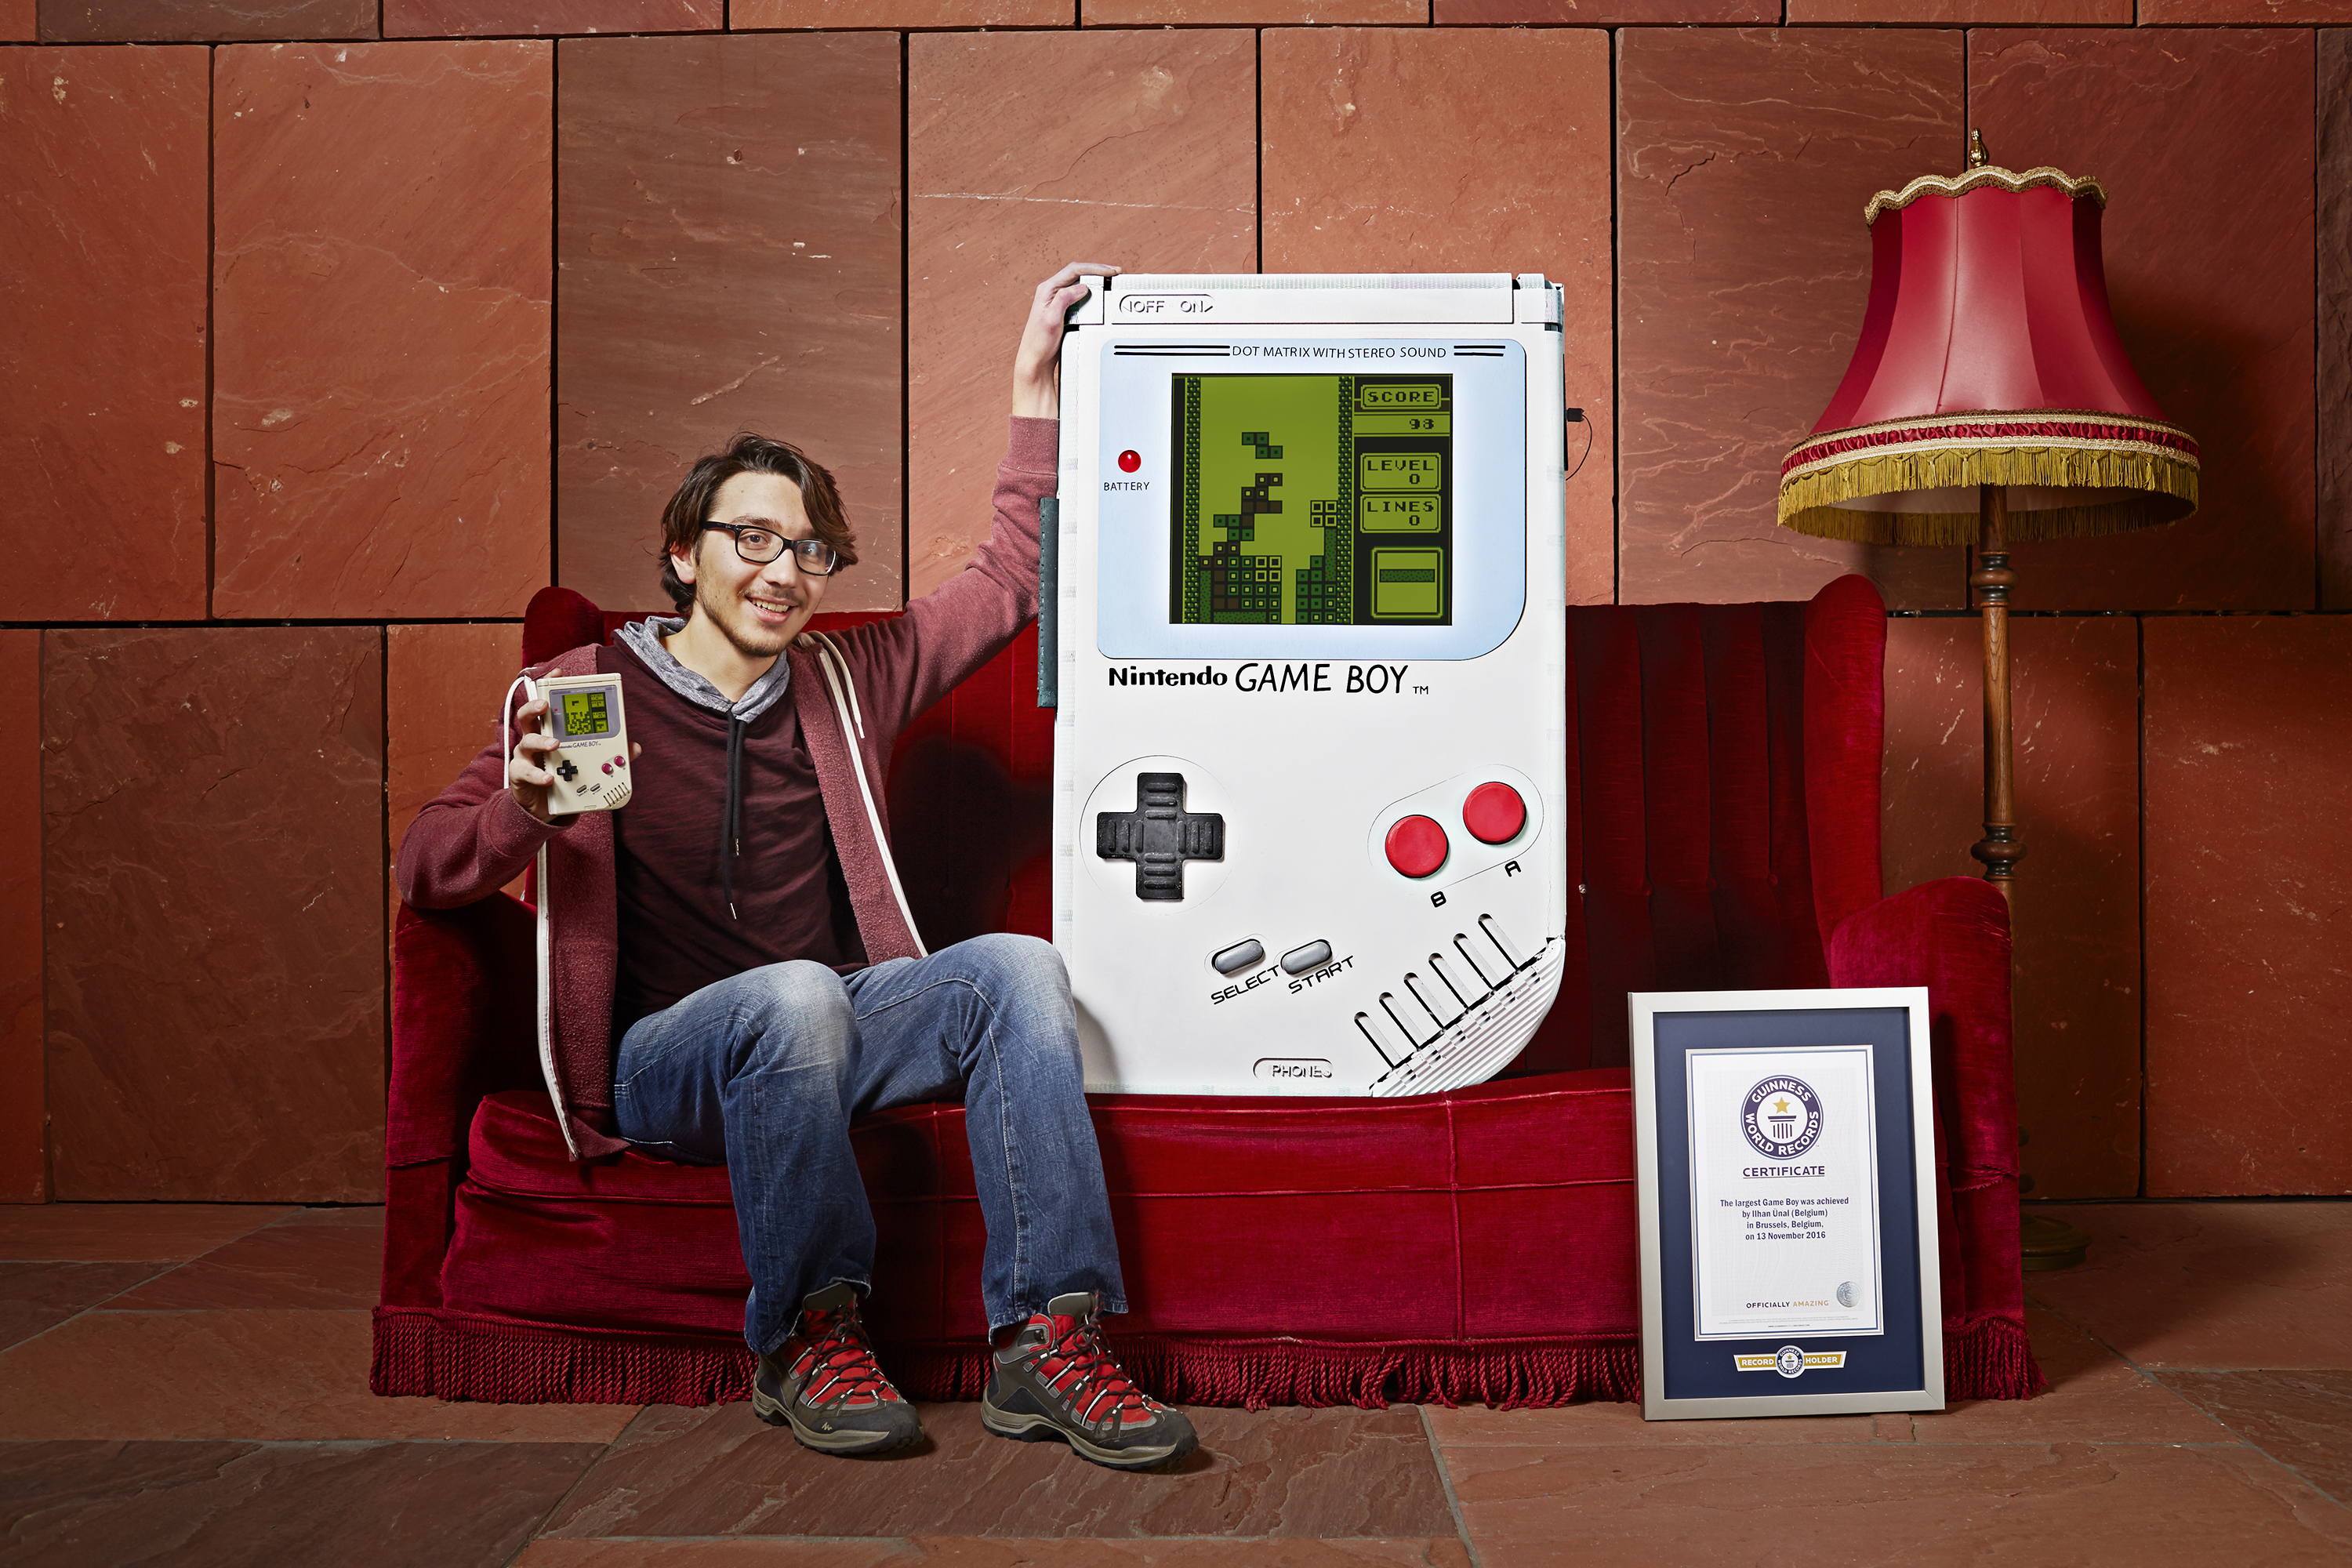 Ilhan Unal with his massive Game Boy